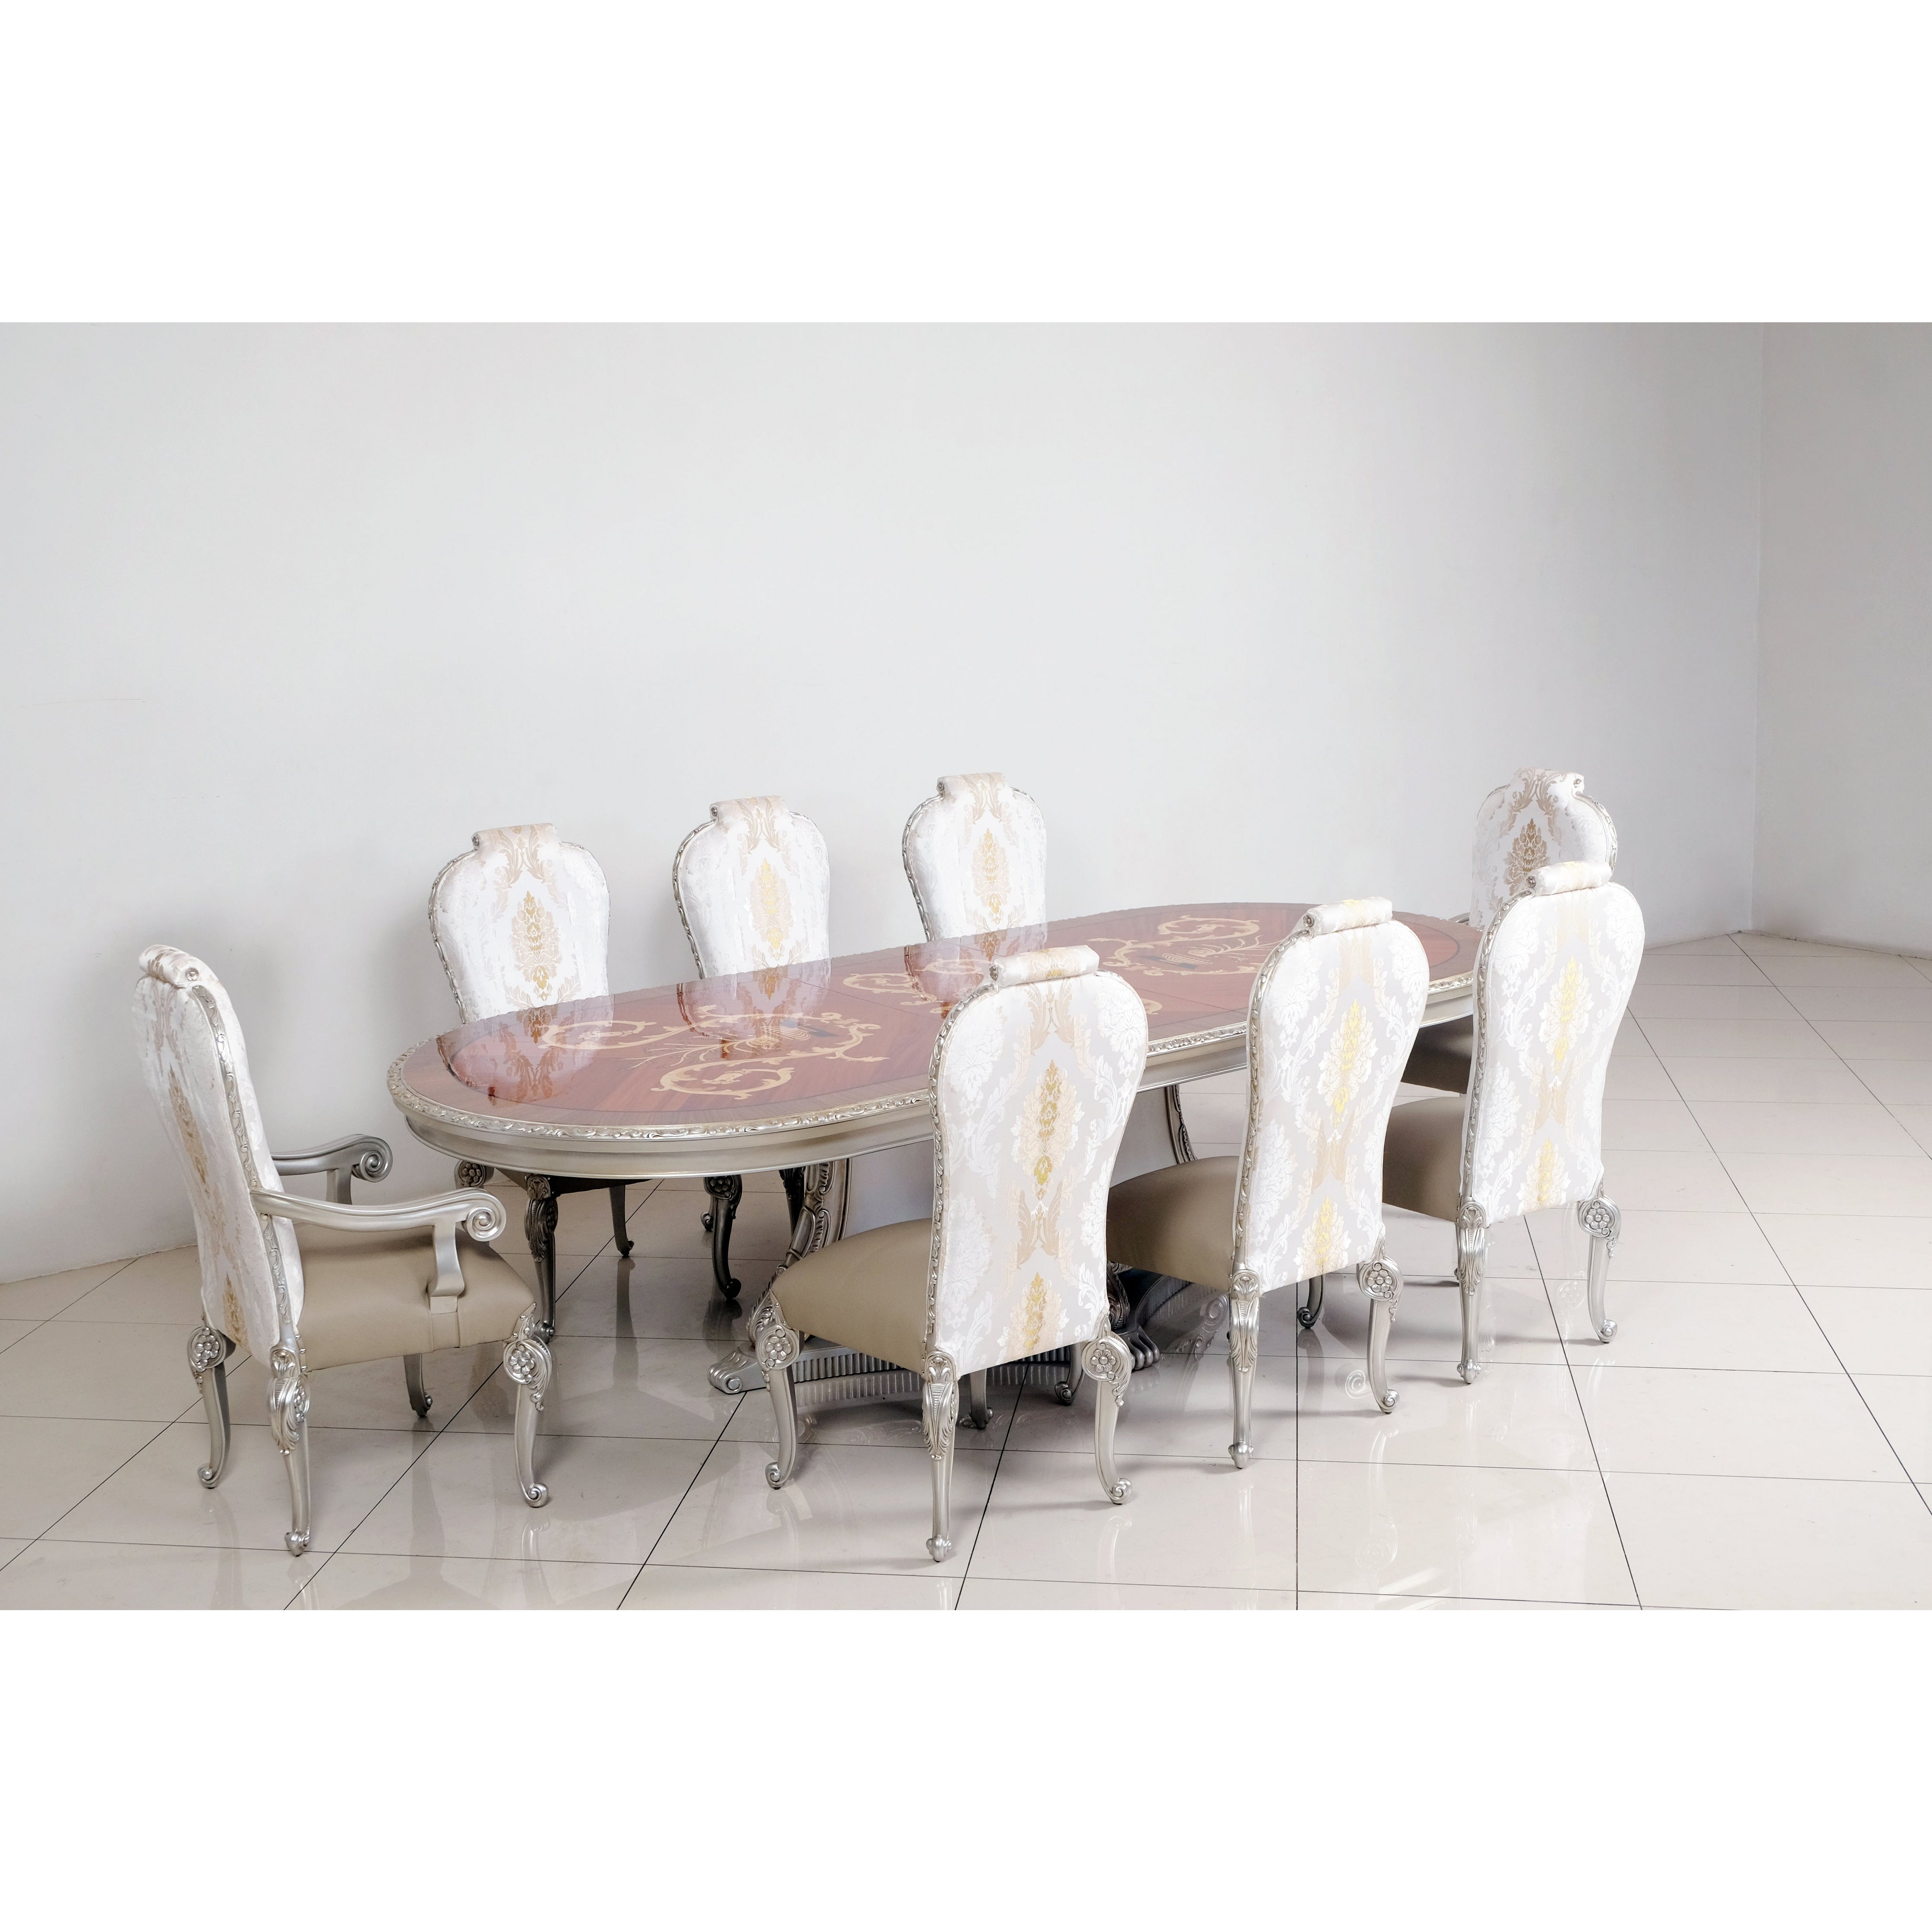 European Furniture - Bellagio 9 Piece Dining Room Set in Natural - 40050-9SET - New Star Living